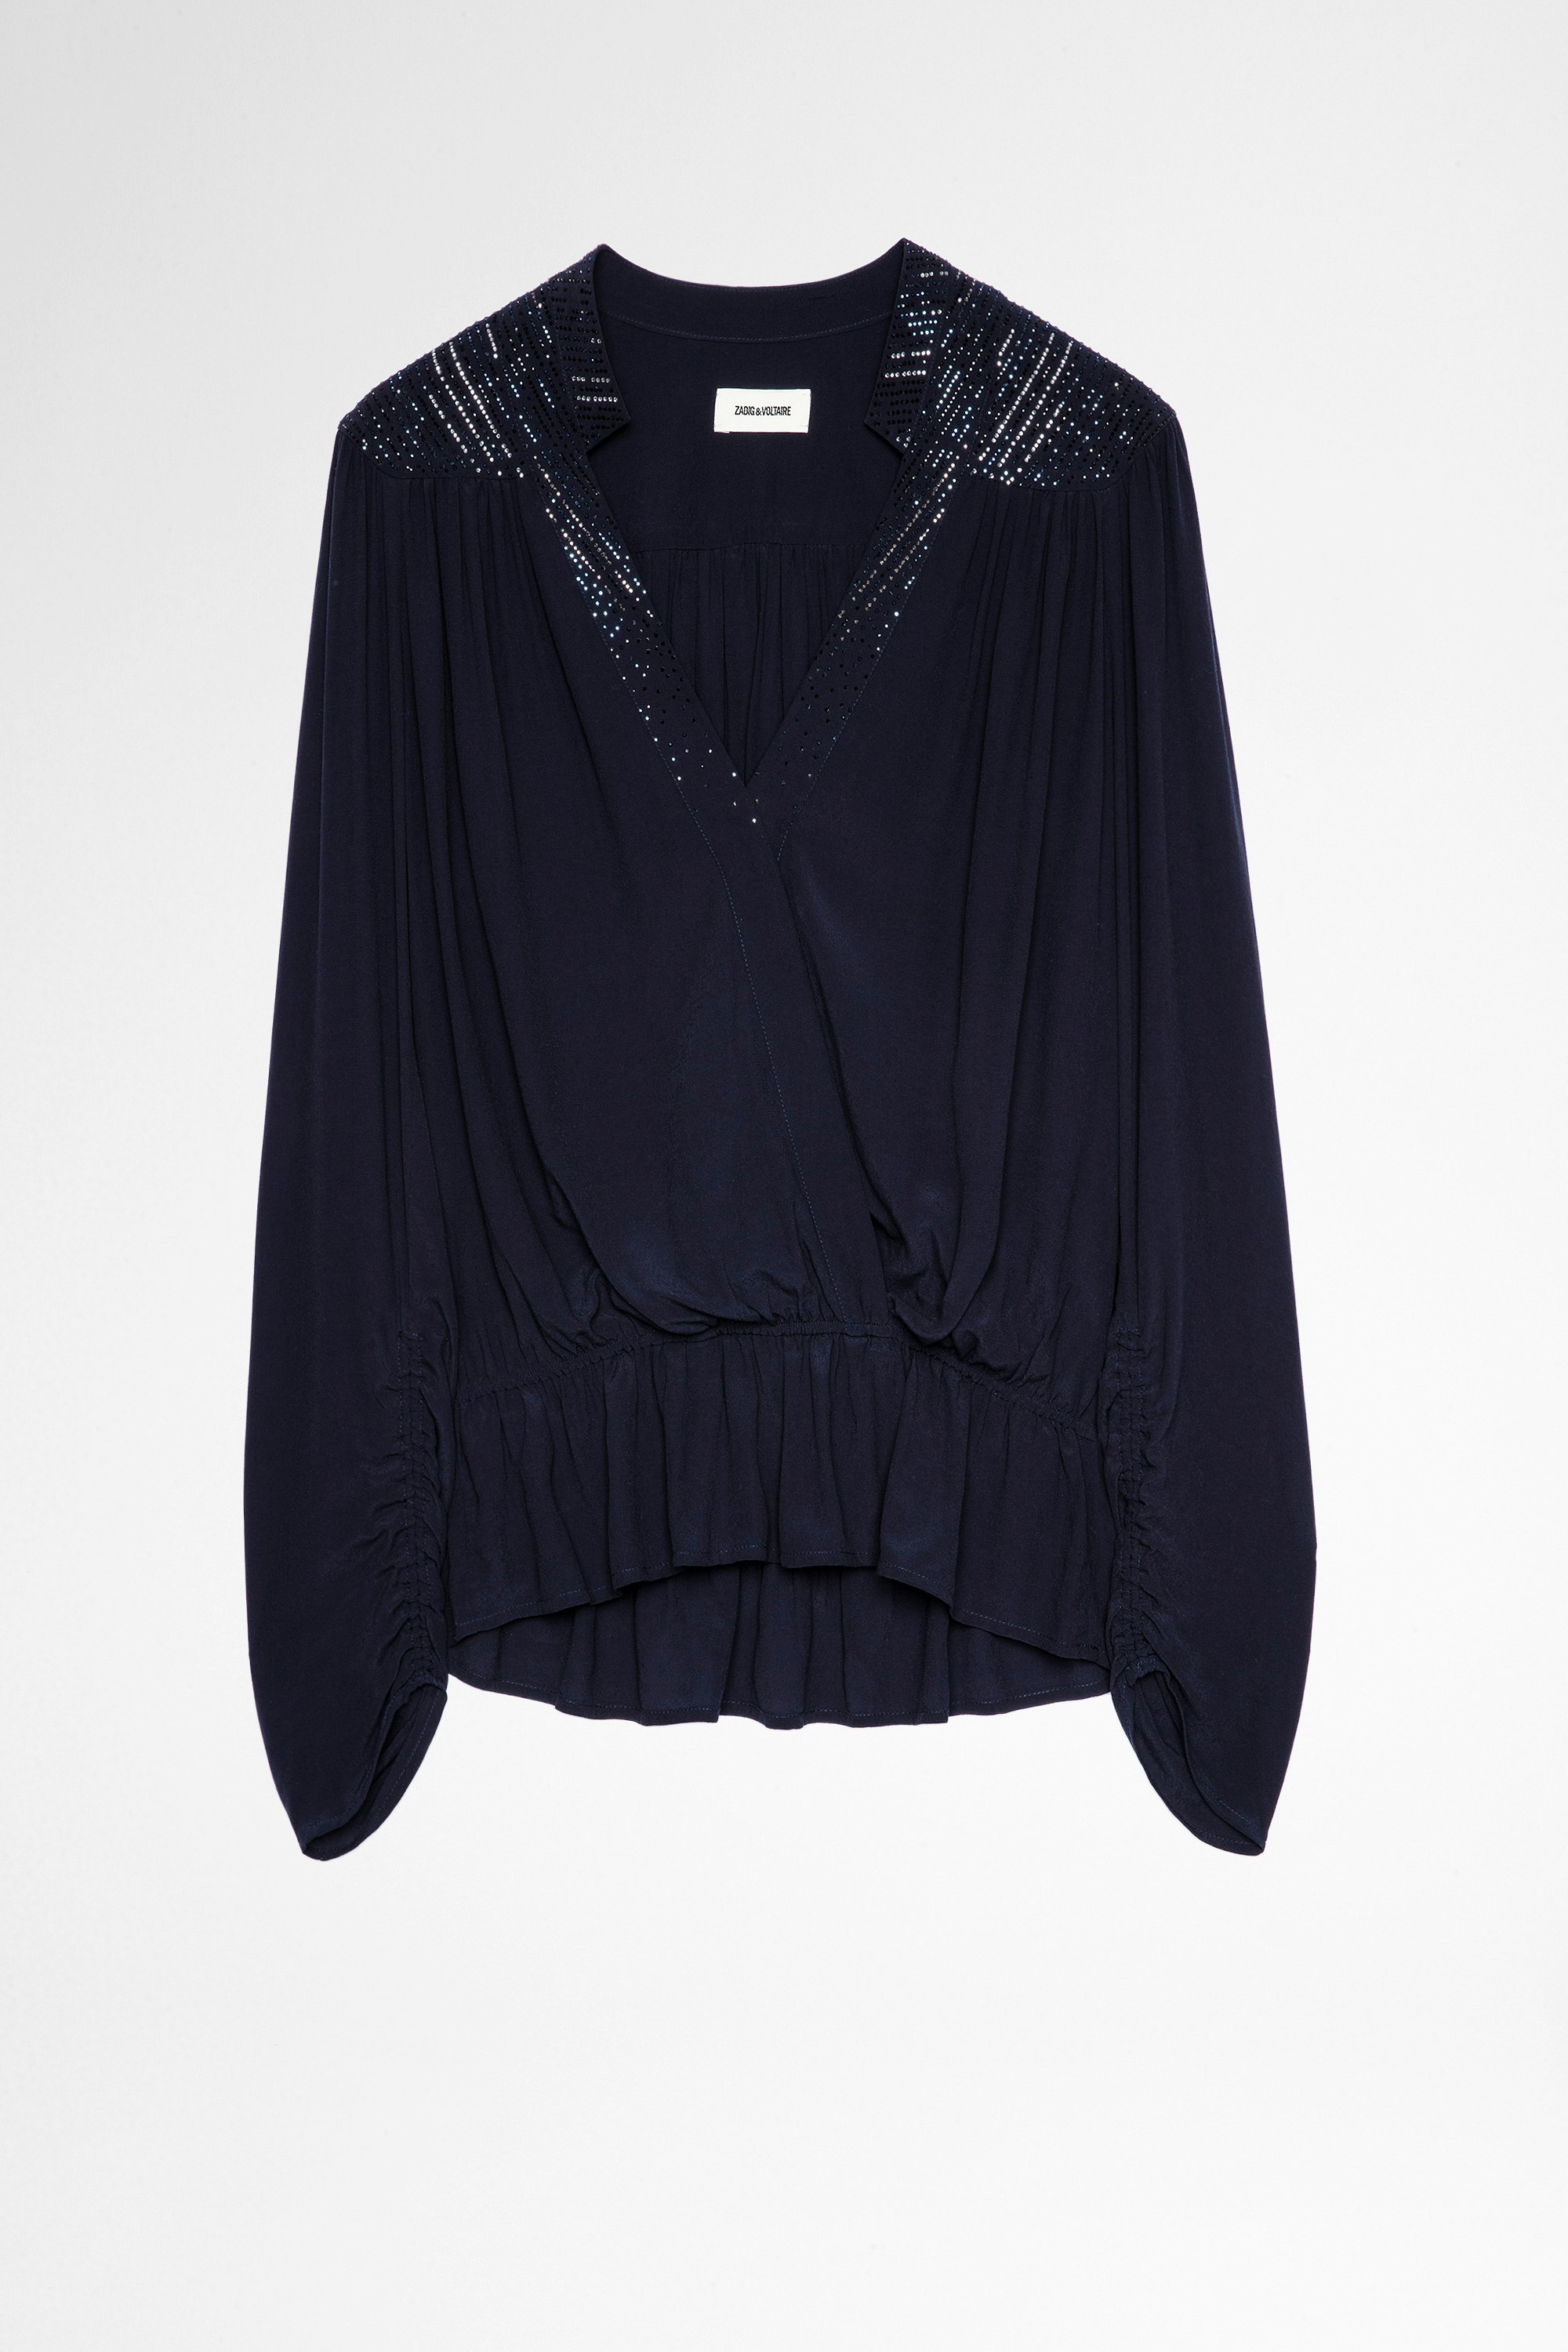 Tori Rhinestone Blouse Women's blouse in navy blue with crystals. Made with fibers from sustainably managed forests.